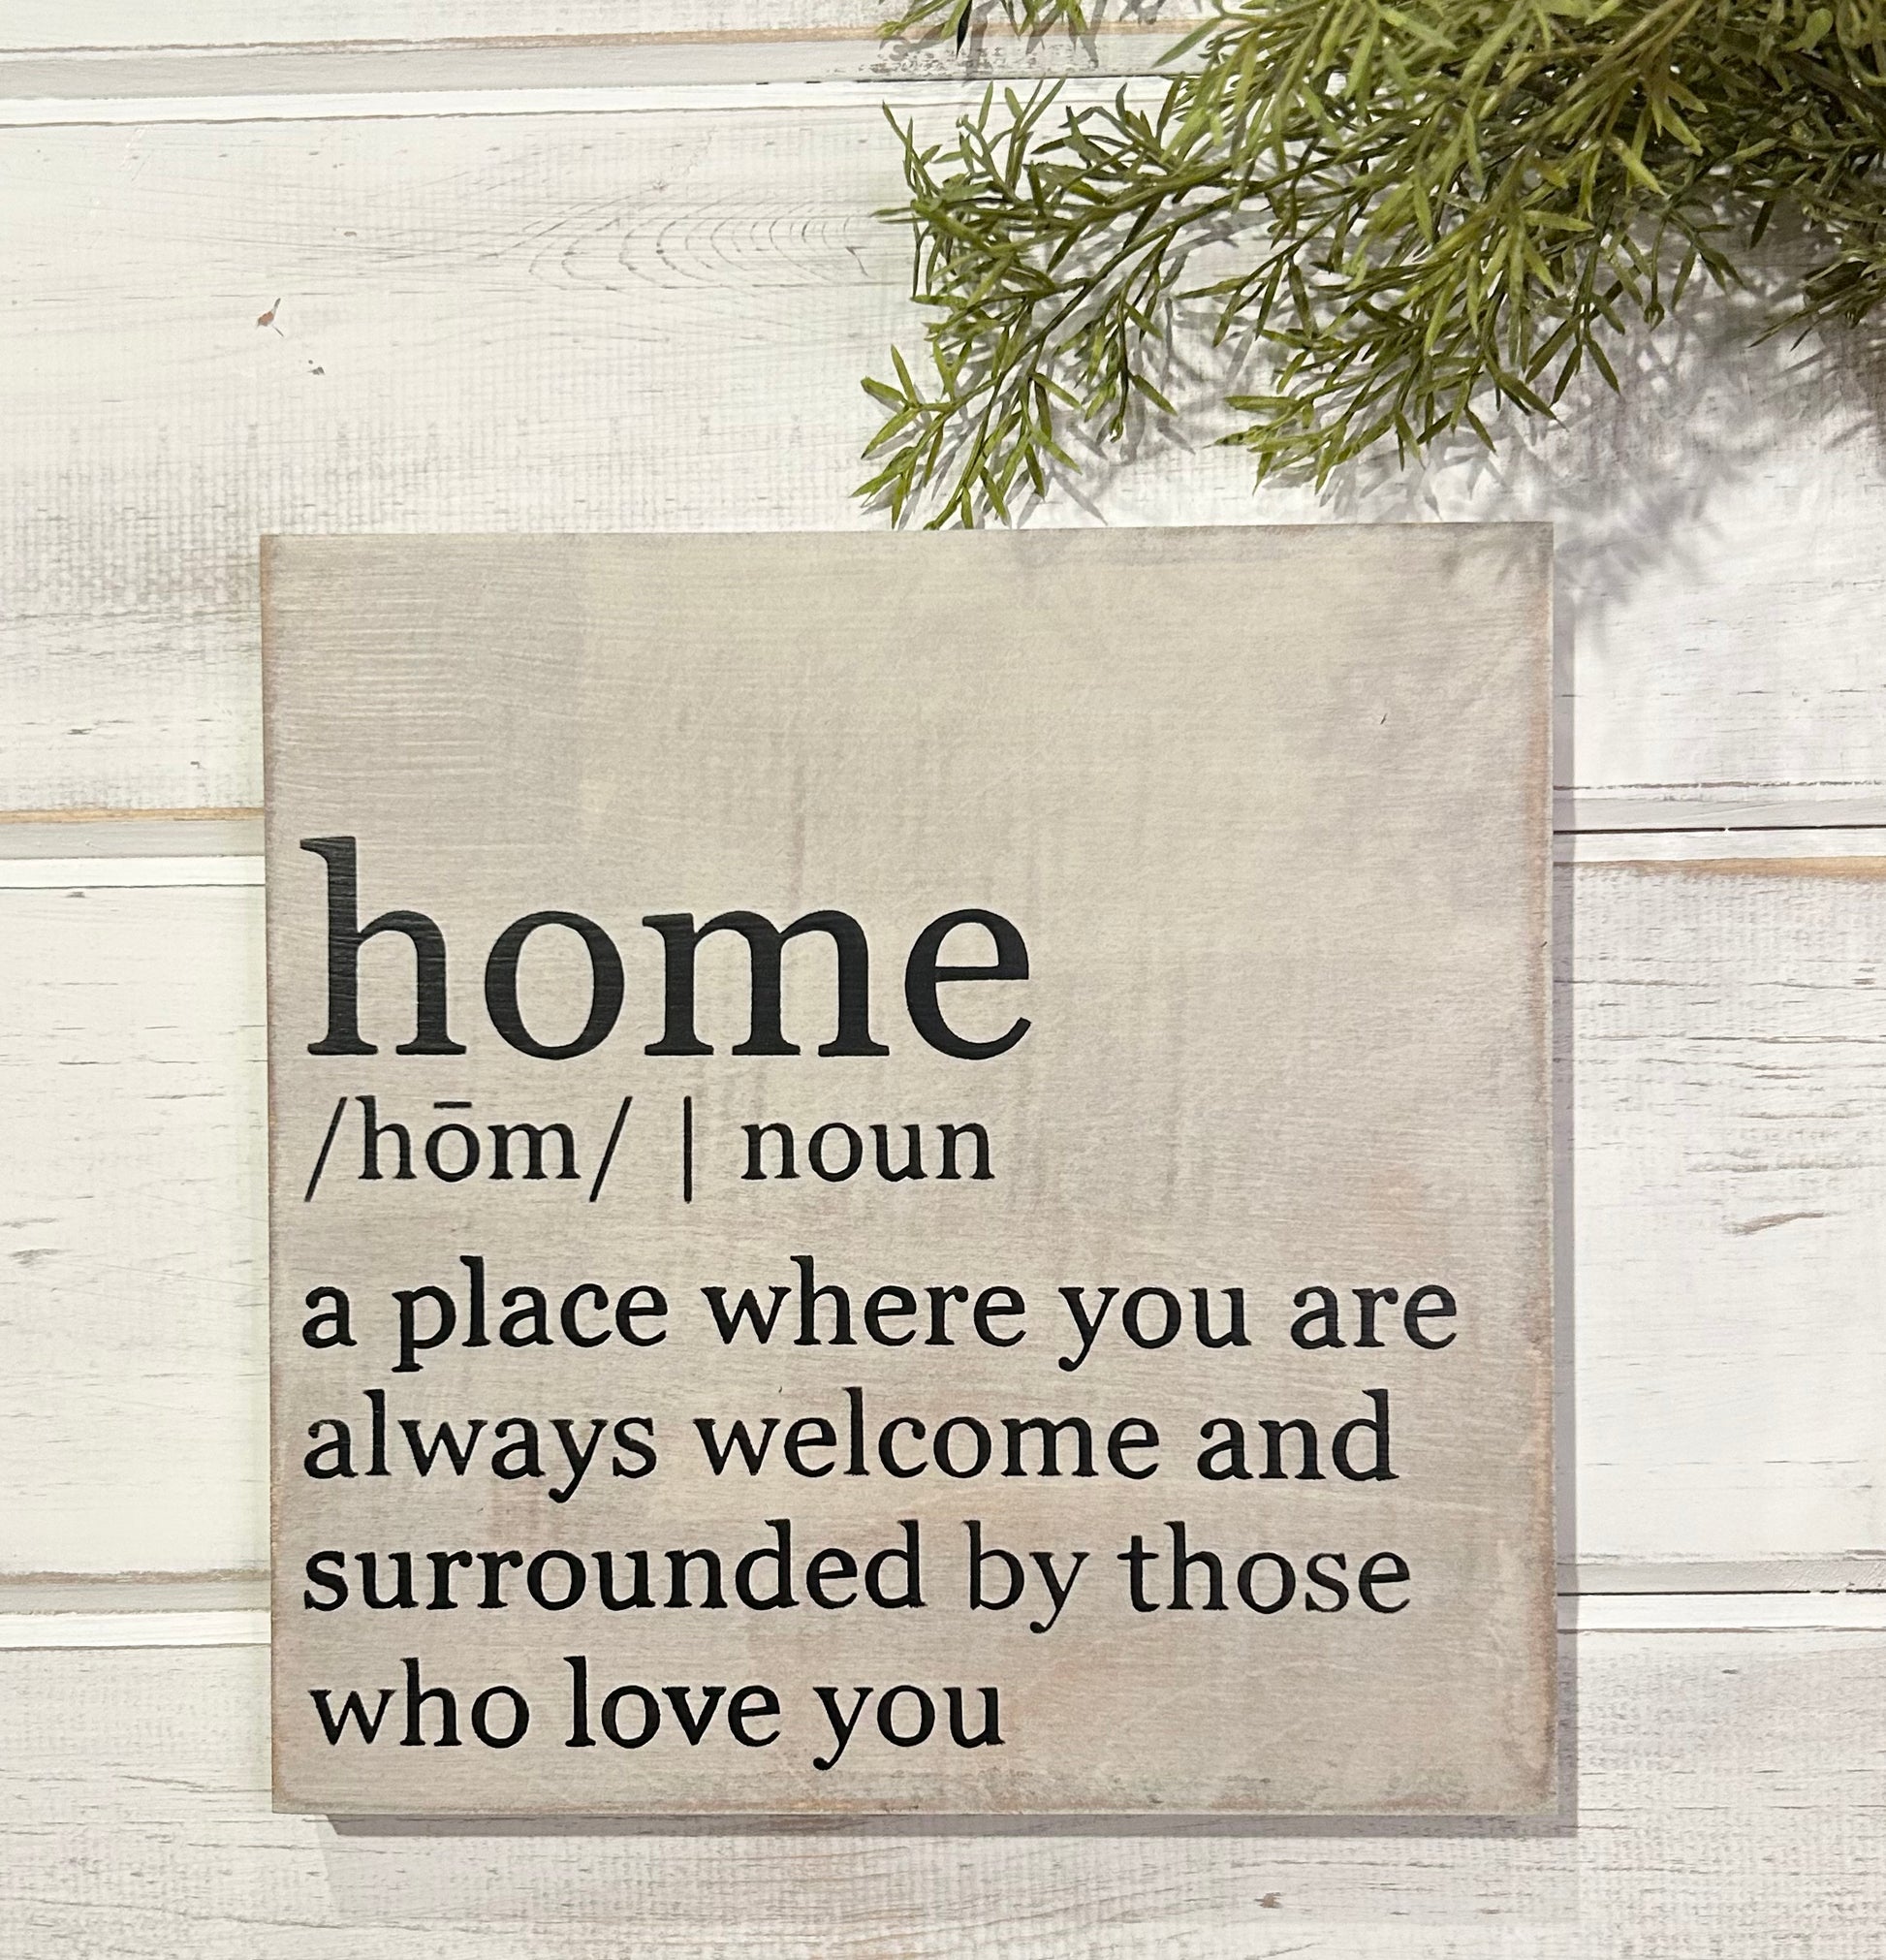 "Home" inspirational wood sign